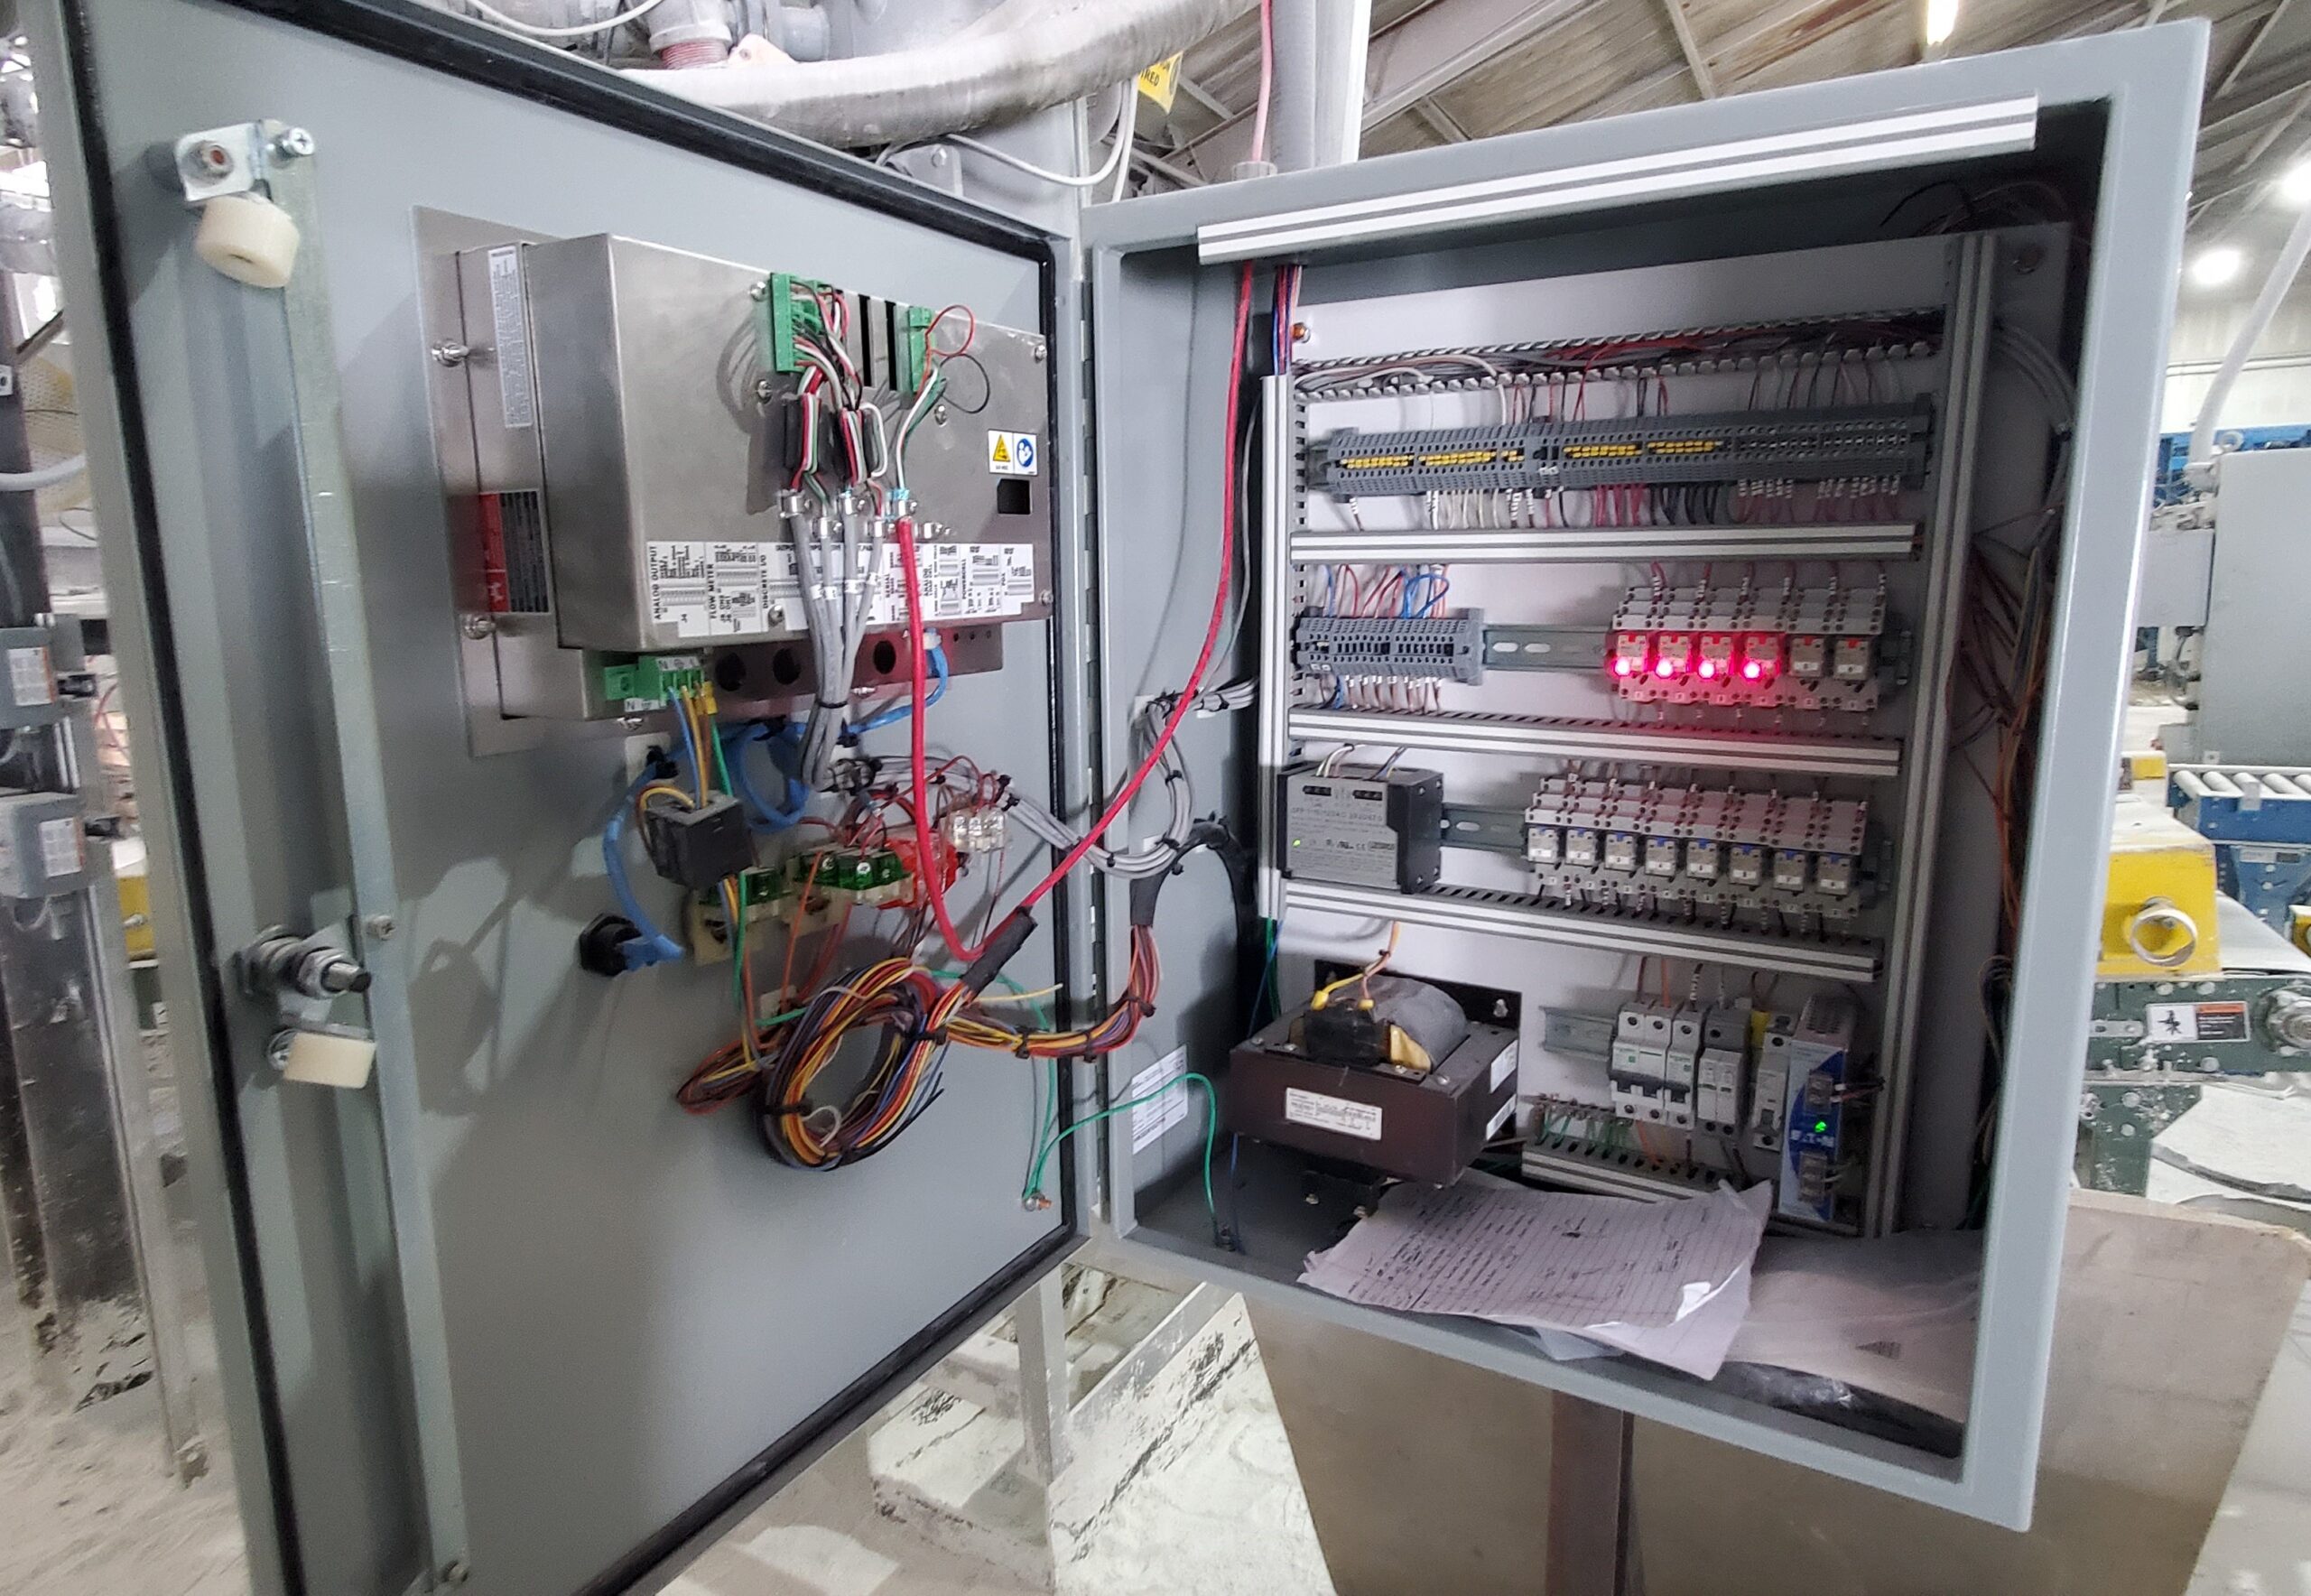 Motor control electricians available to provide quality service